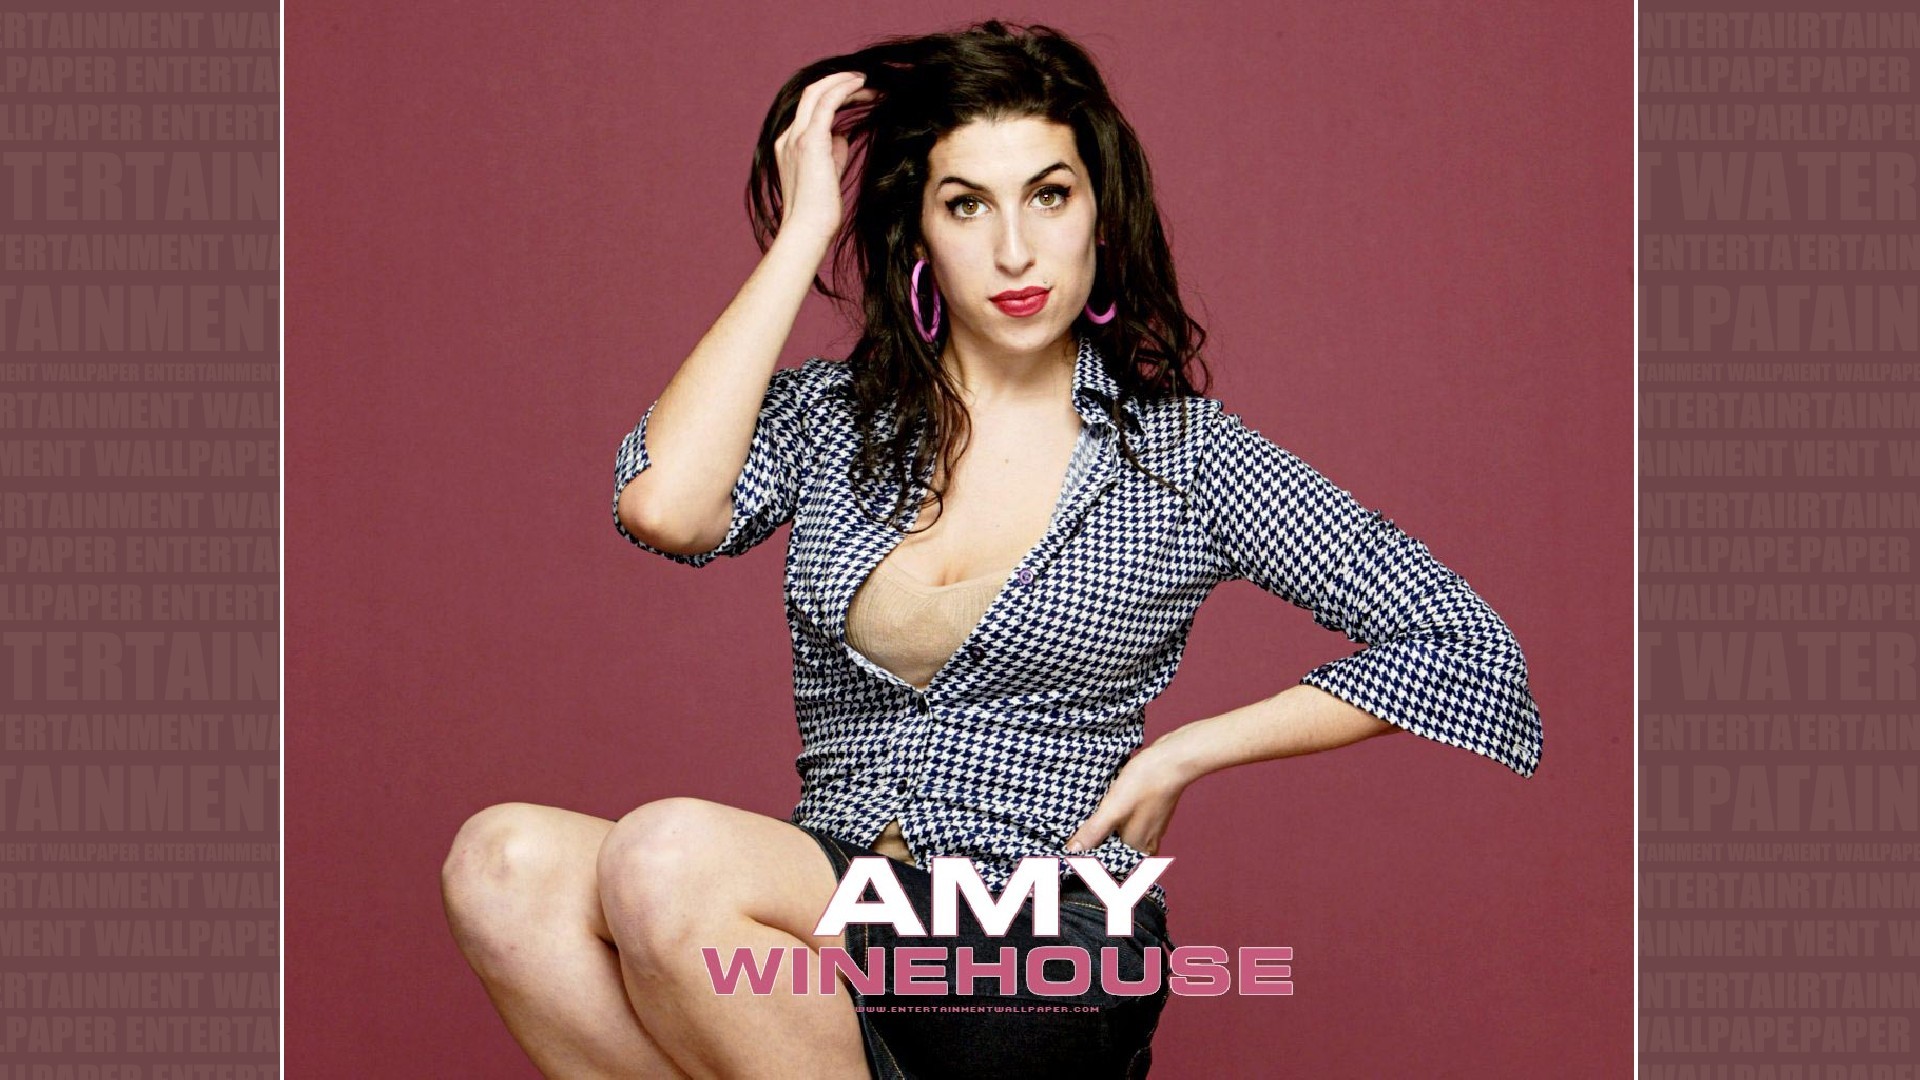 1920x1080 Amy Winehouse Wallpaper - Original size, download now.